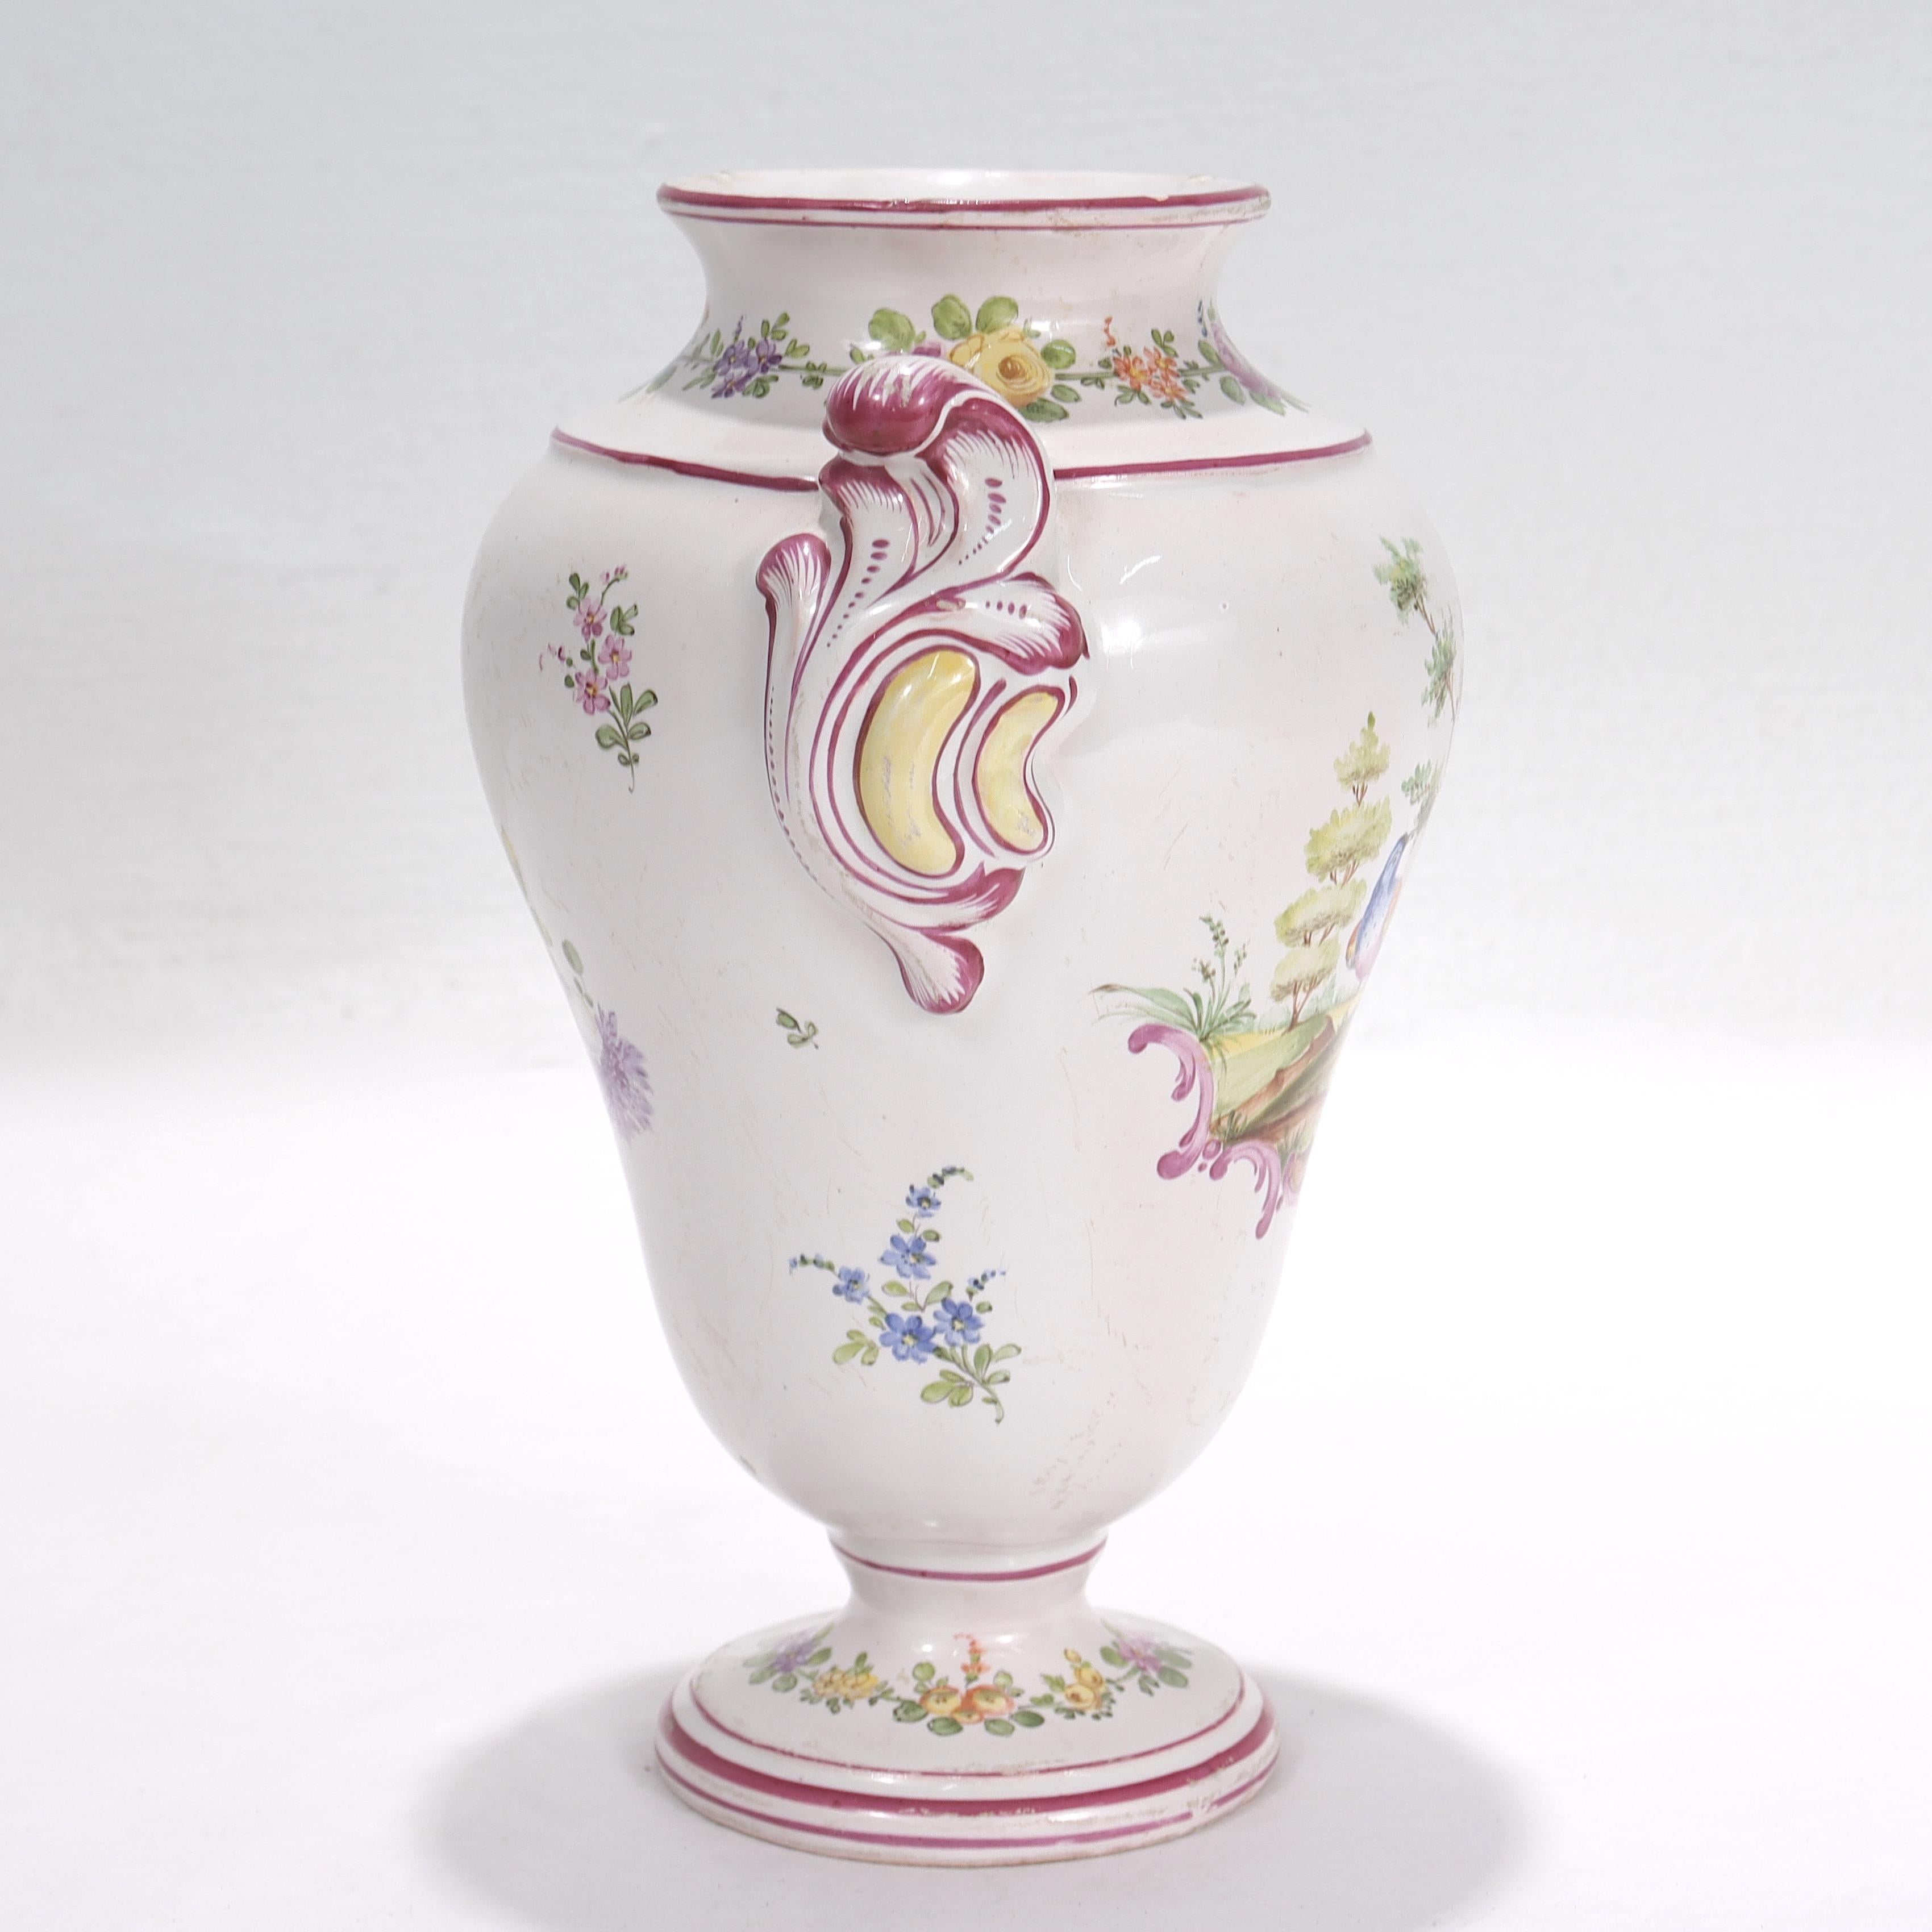 Antique Aprey French Faience Pottery Vase with Floral Decoration In Good Condition For Sale In Philadelphia, PA